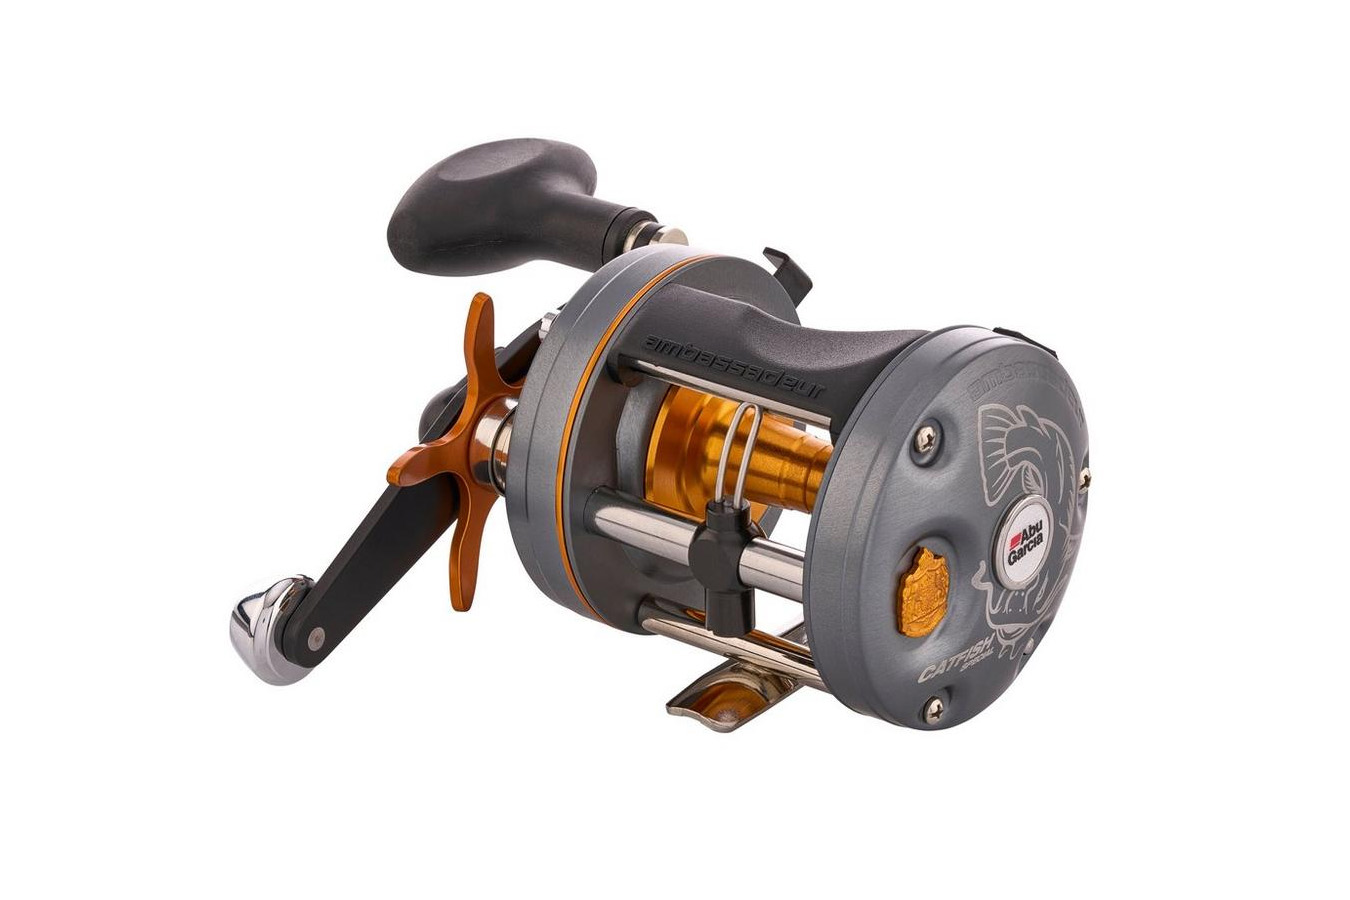 Discount Abu Garcia C3 Catfish Special 7000 4.1:1 Round Reel for